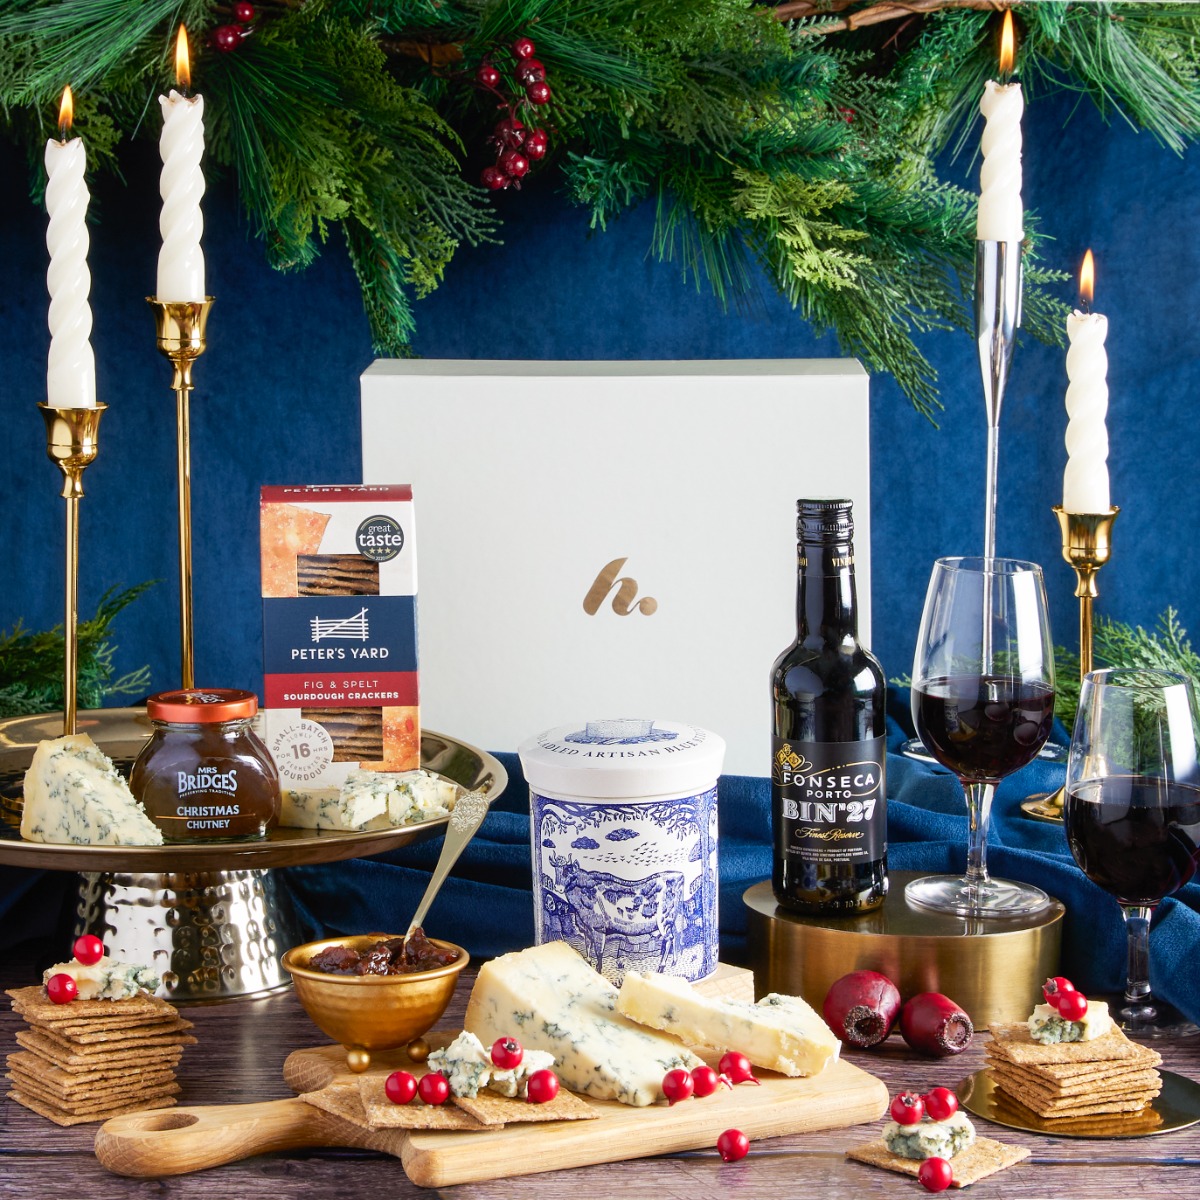  The Port & Stilton Christmas Gift Box with contents on display